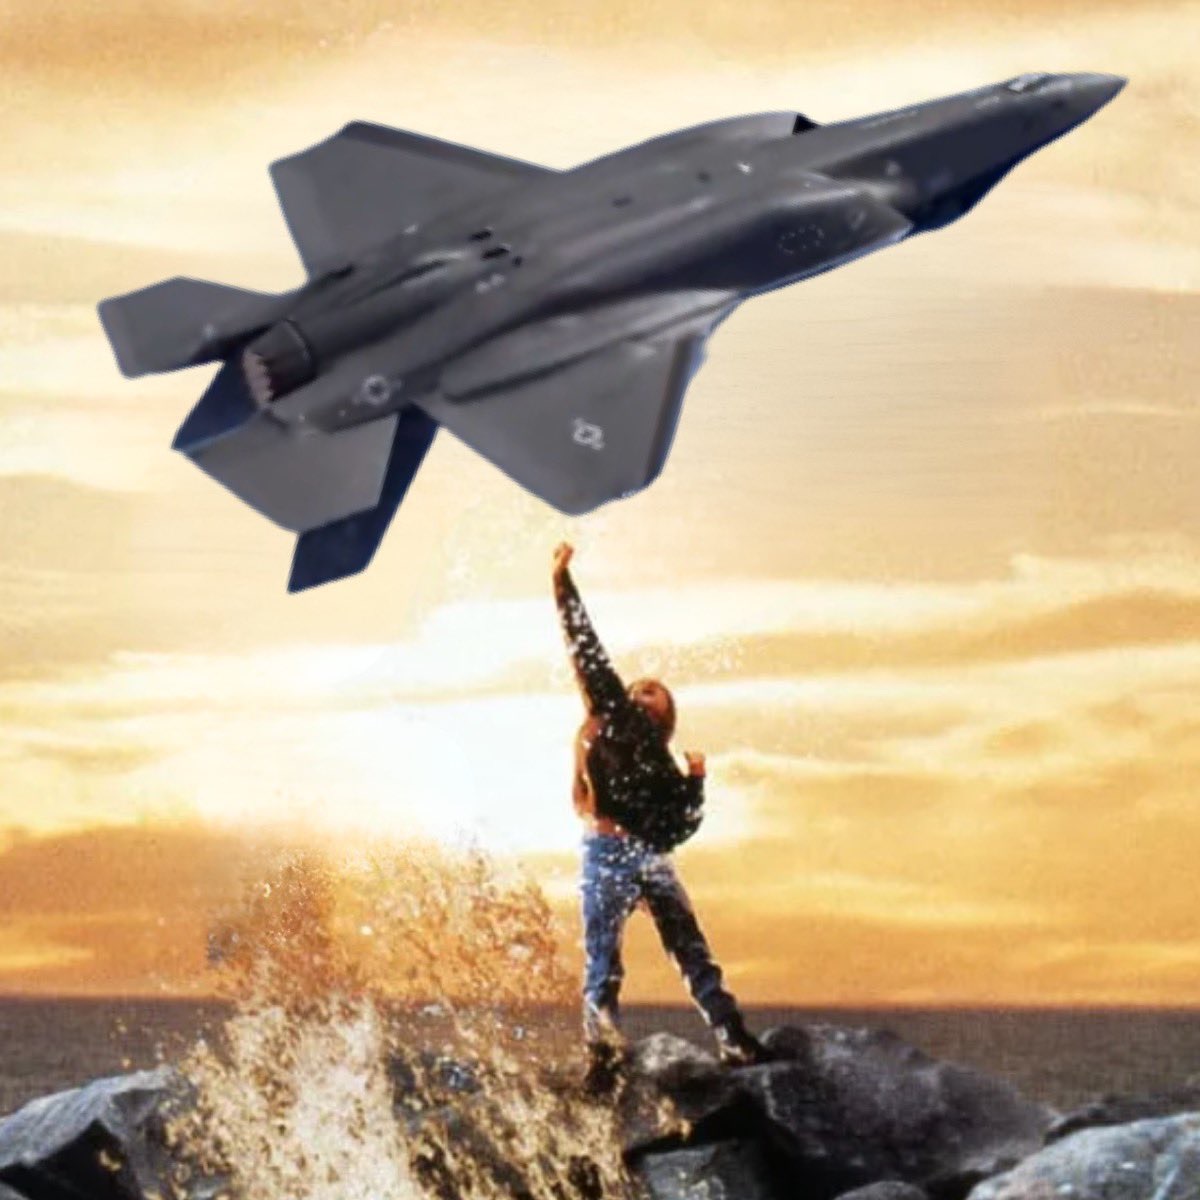 'Have You Seen This F-35?': The Funniest Missing F-35 Memes Worth 80,000,000 Chuckles